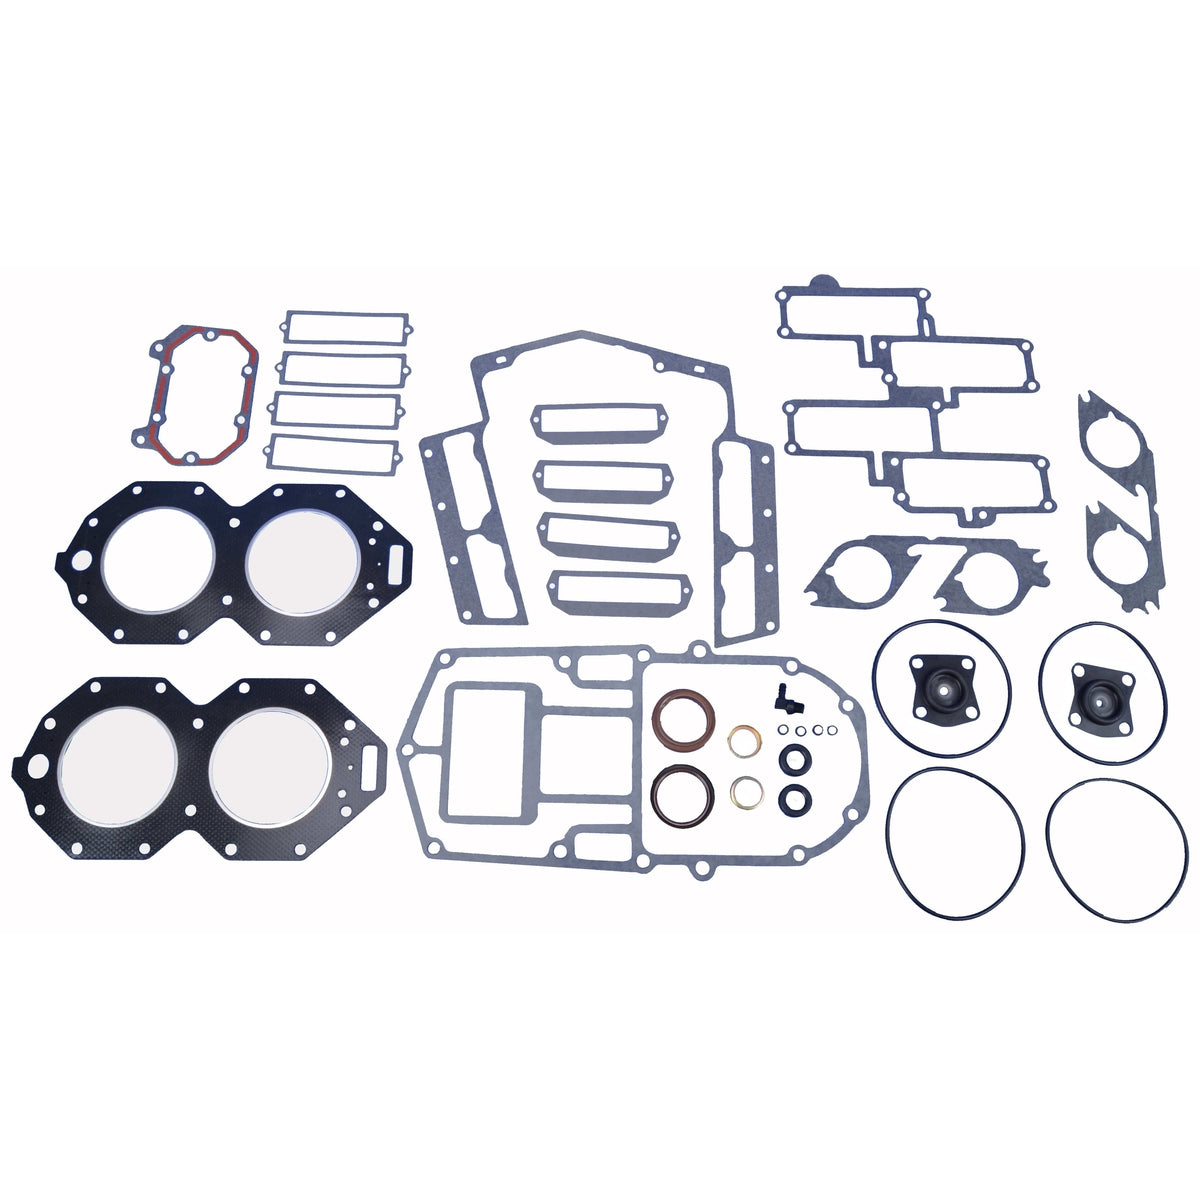 BRP Qualifies for Free Shipping BRP Gaskit Kit #396750